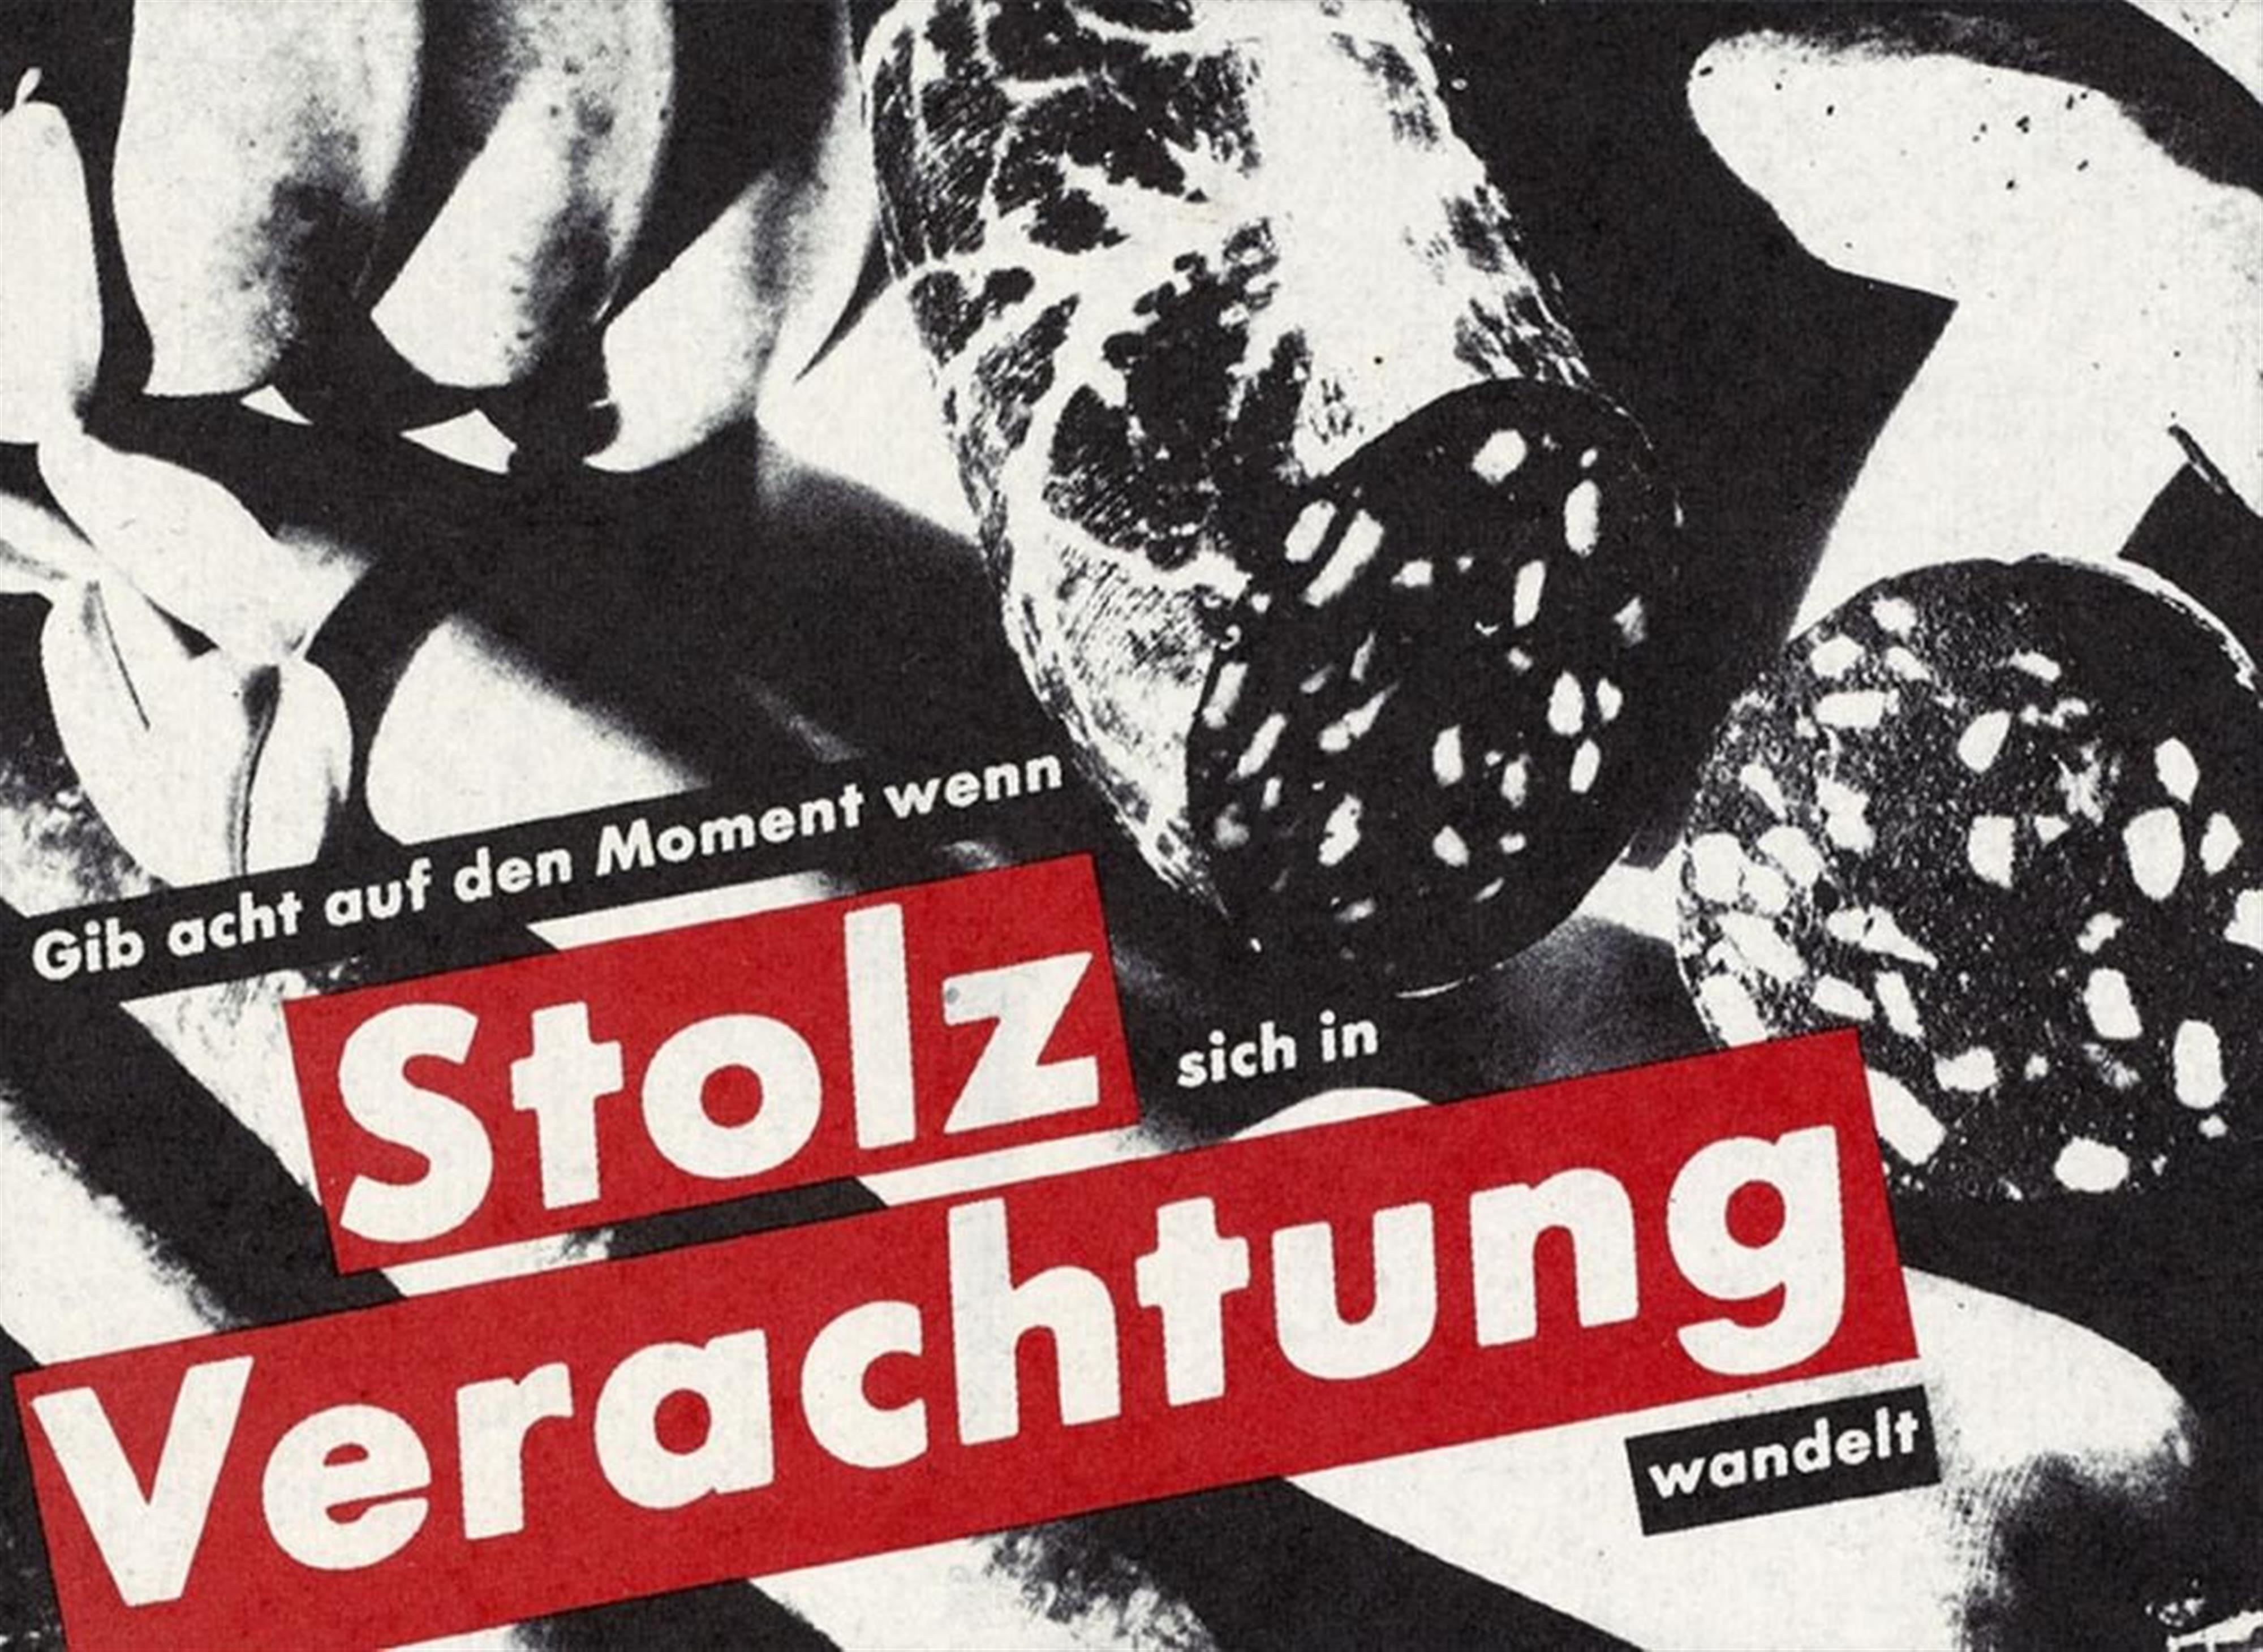 Barbara Kruger - Gib' acht auf den Moment wenn Stolz sich in Verachtung wandelt (pay attention to the moment when prides turns into contempt) - image-1